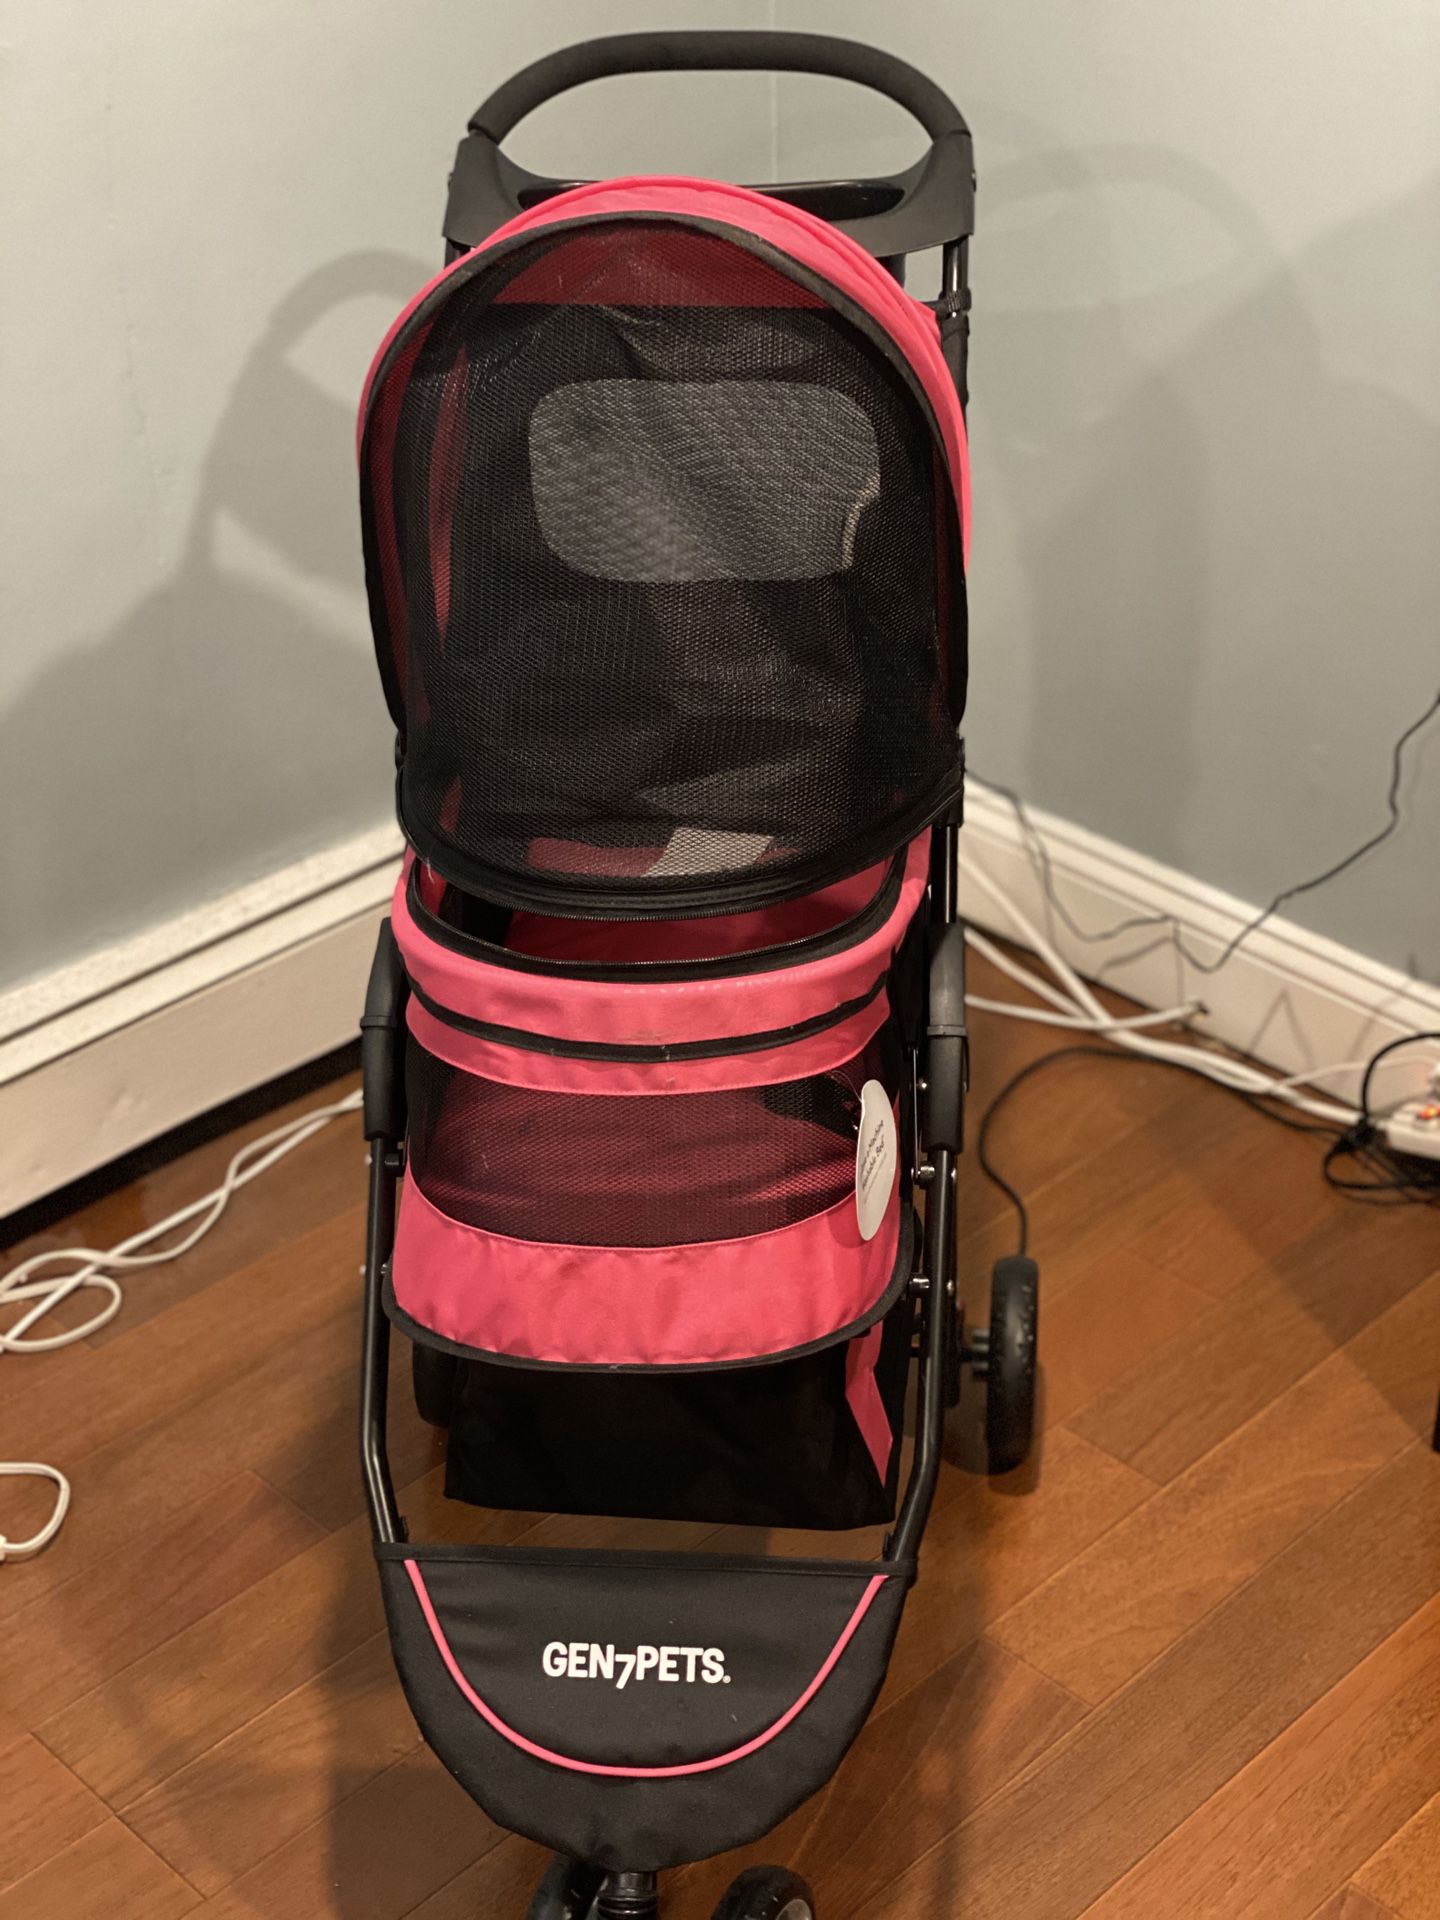 Brand new Gen7Pets stroller for dogs or cats !